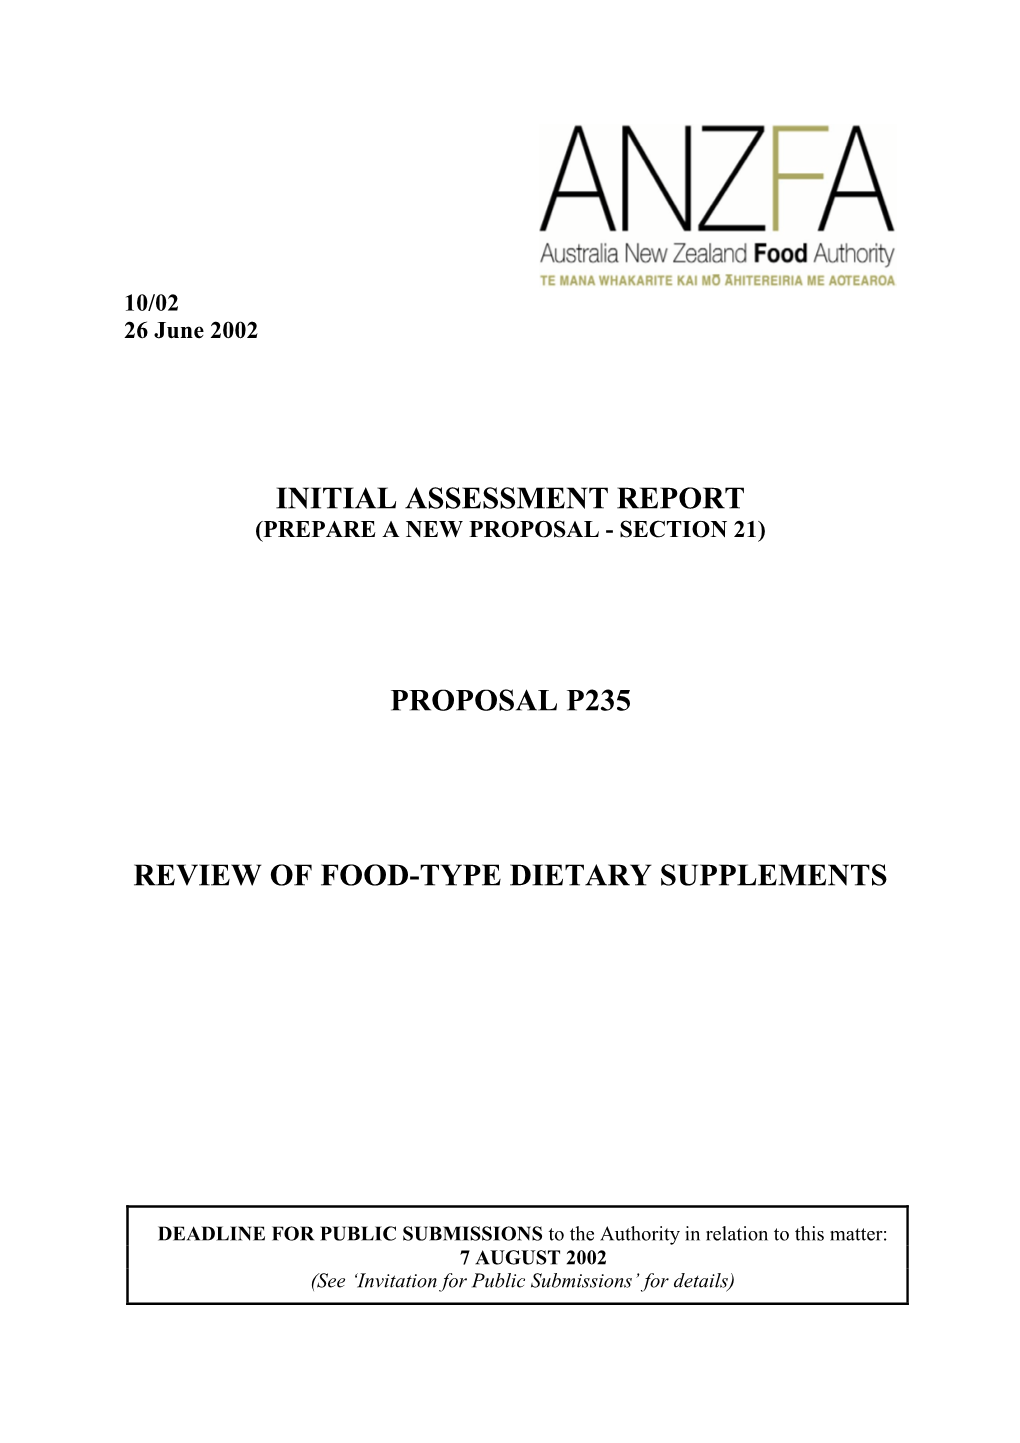 Initial Assessment Report Proposal P235 Review Of